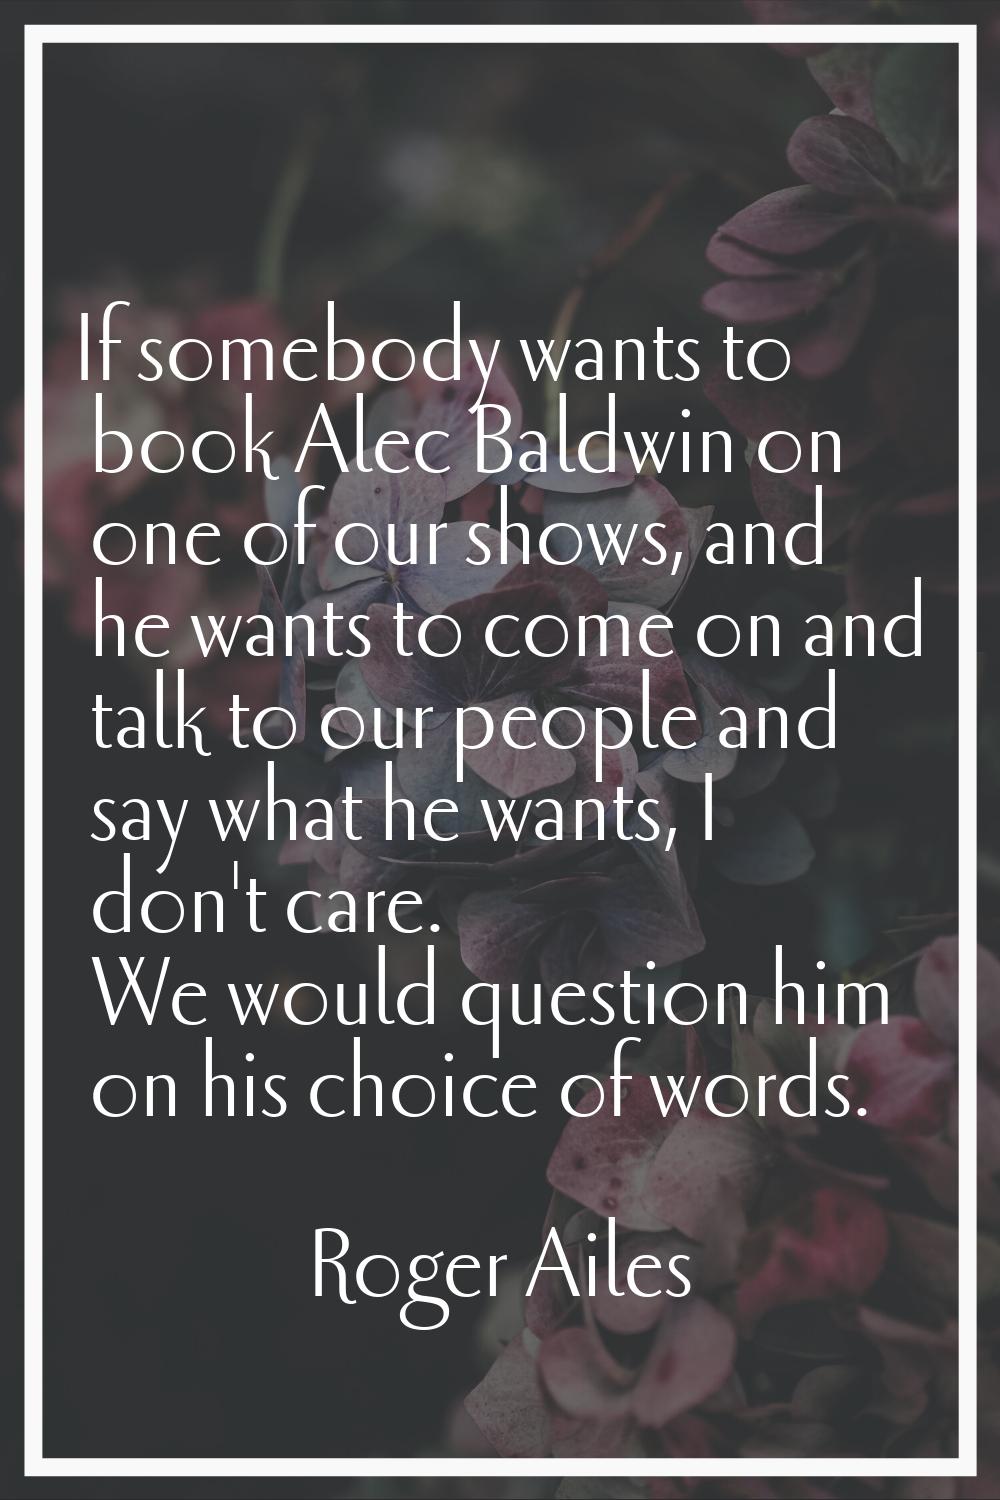 If somebody wants to book Alec Baldwin on one of our shows, and he wants to come on and talk to our